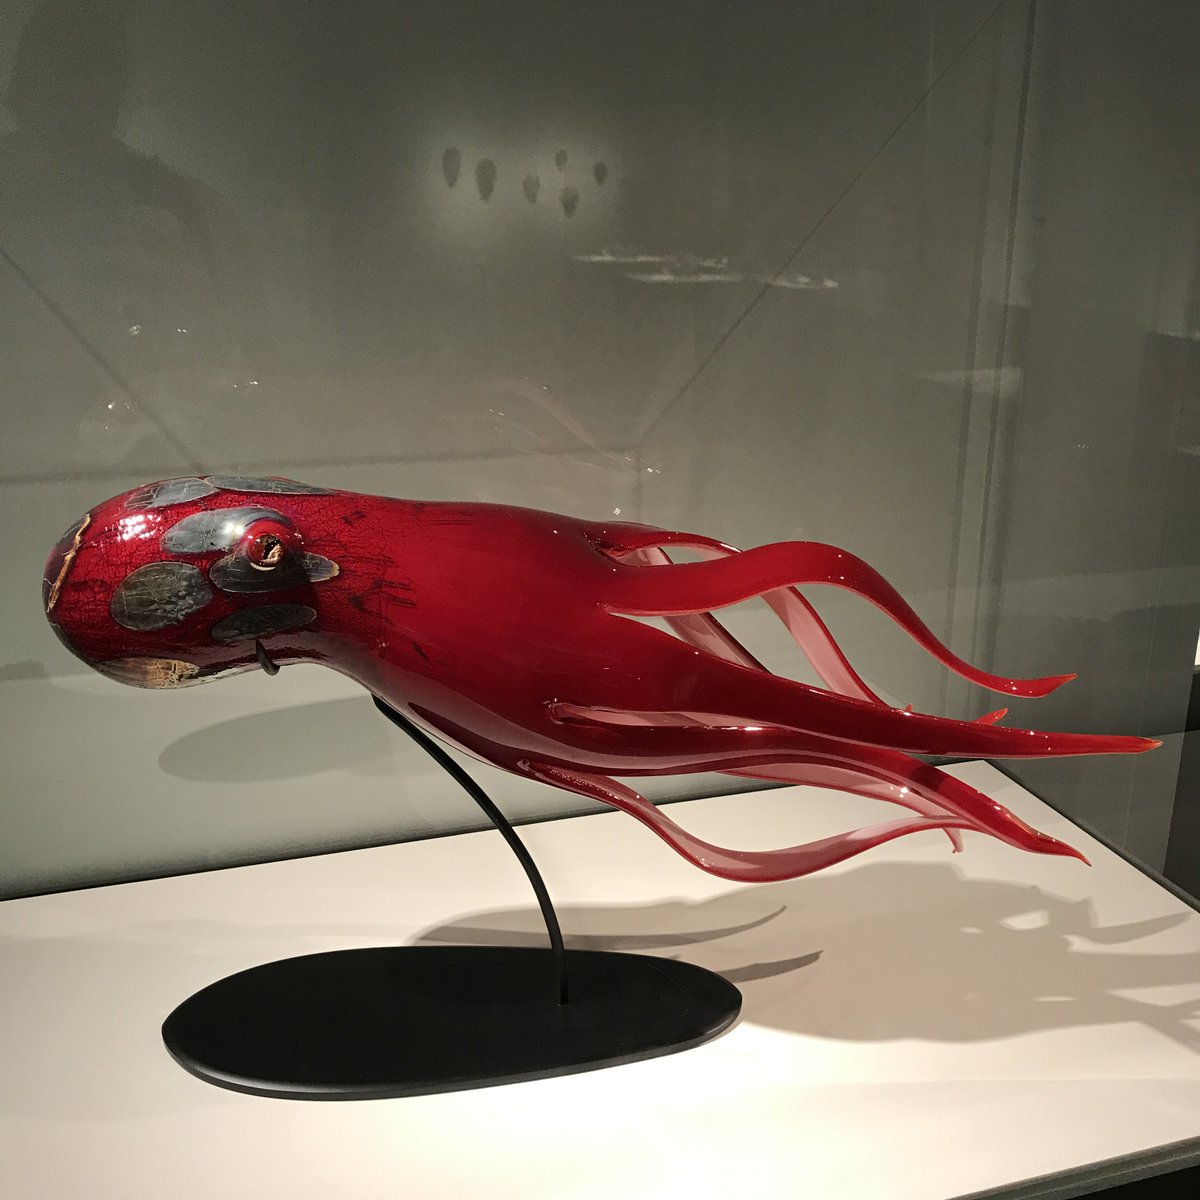 Giant Pacific Octopus by #RavenSkyriver @MuseumofGlass